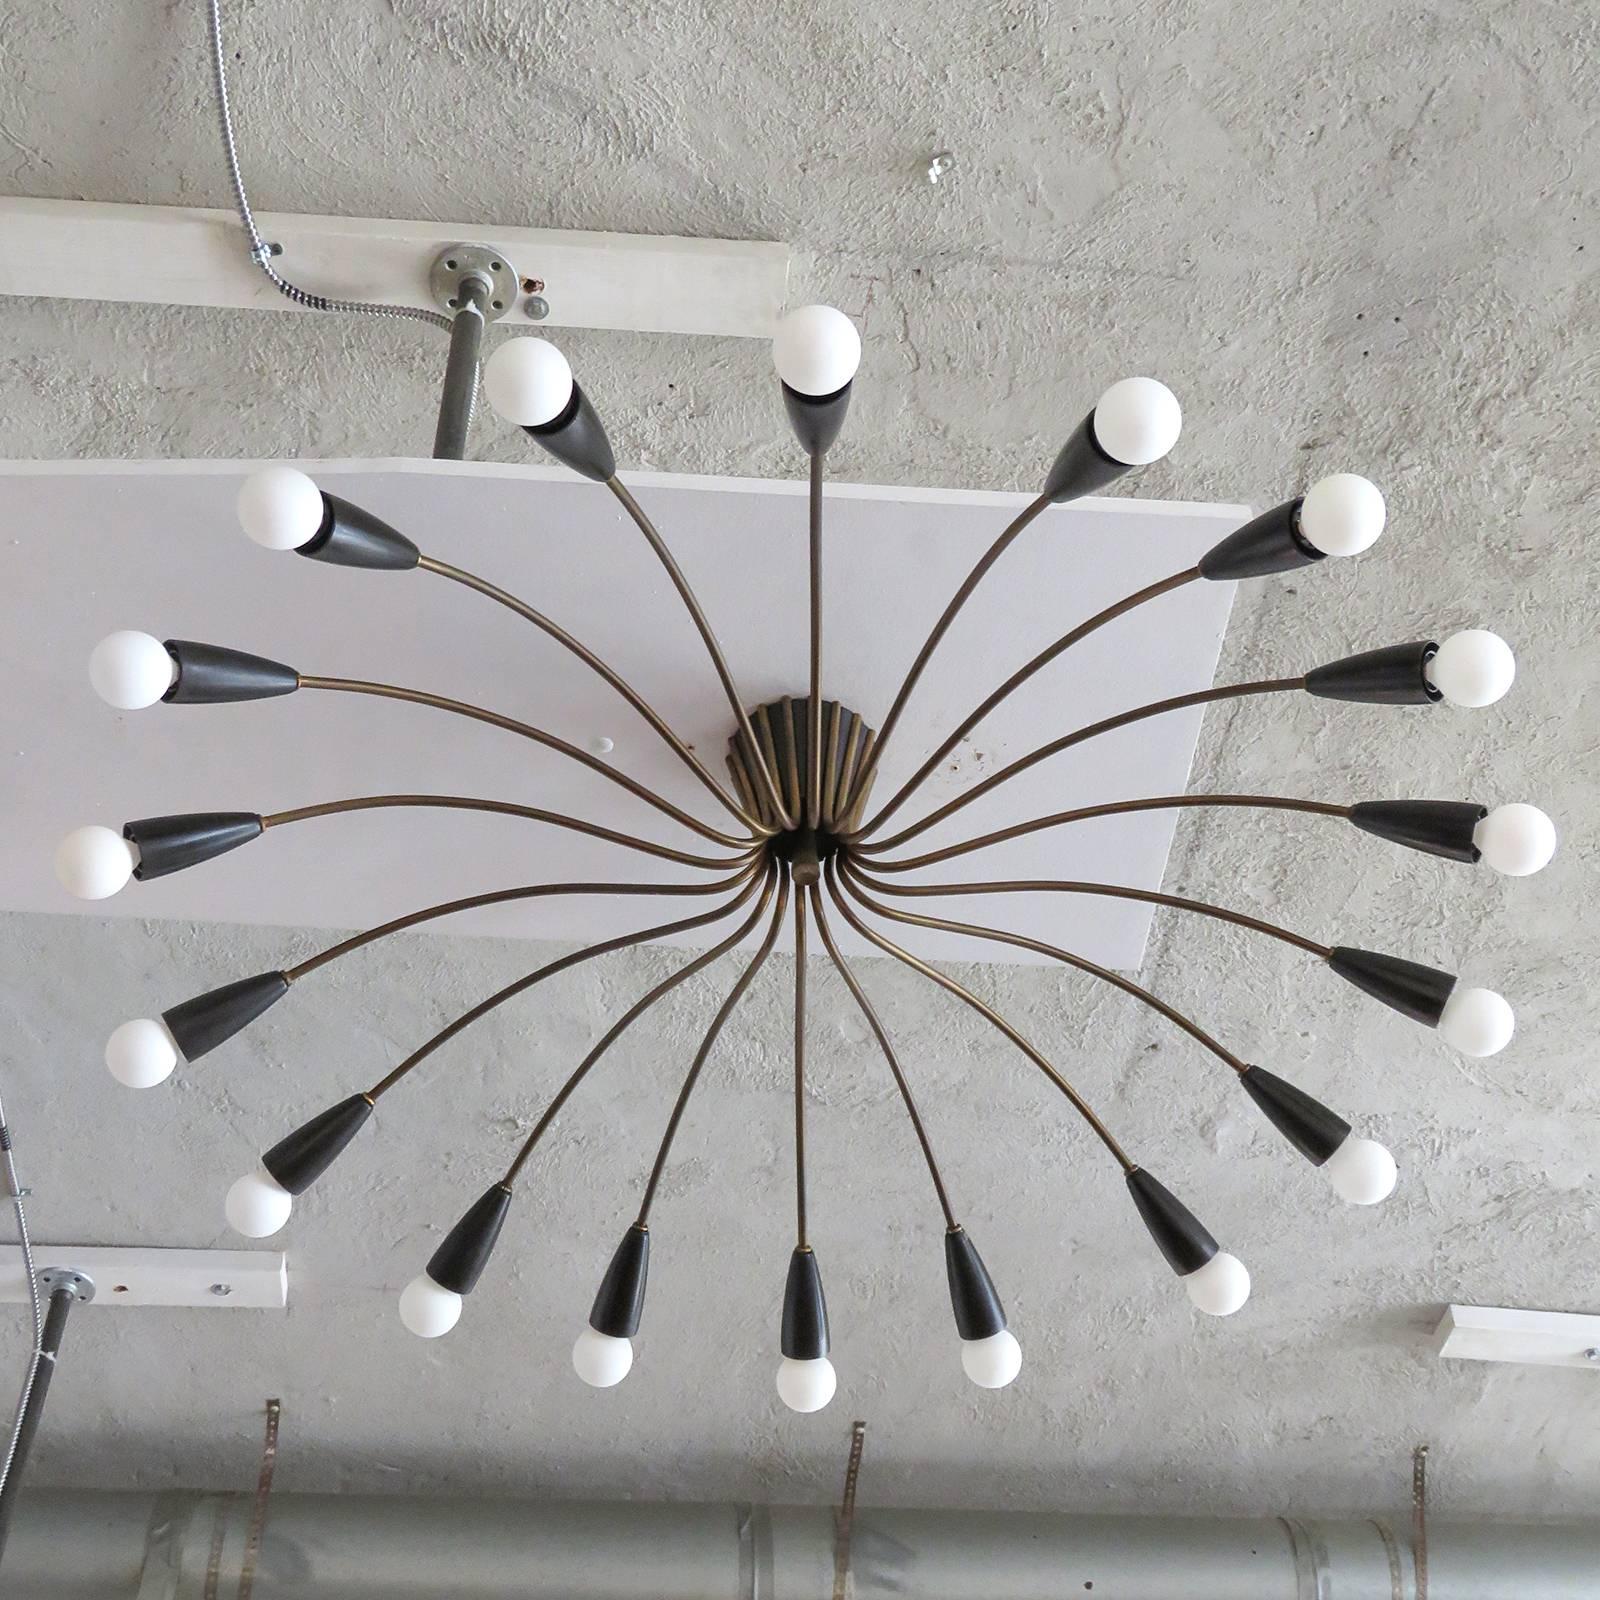 Large-scale Italian eighteen-arm flush mount chandelier, with sculptural brass arms and bakelite socket cups, can be fitted with a drop, per request.